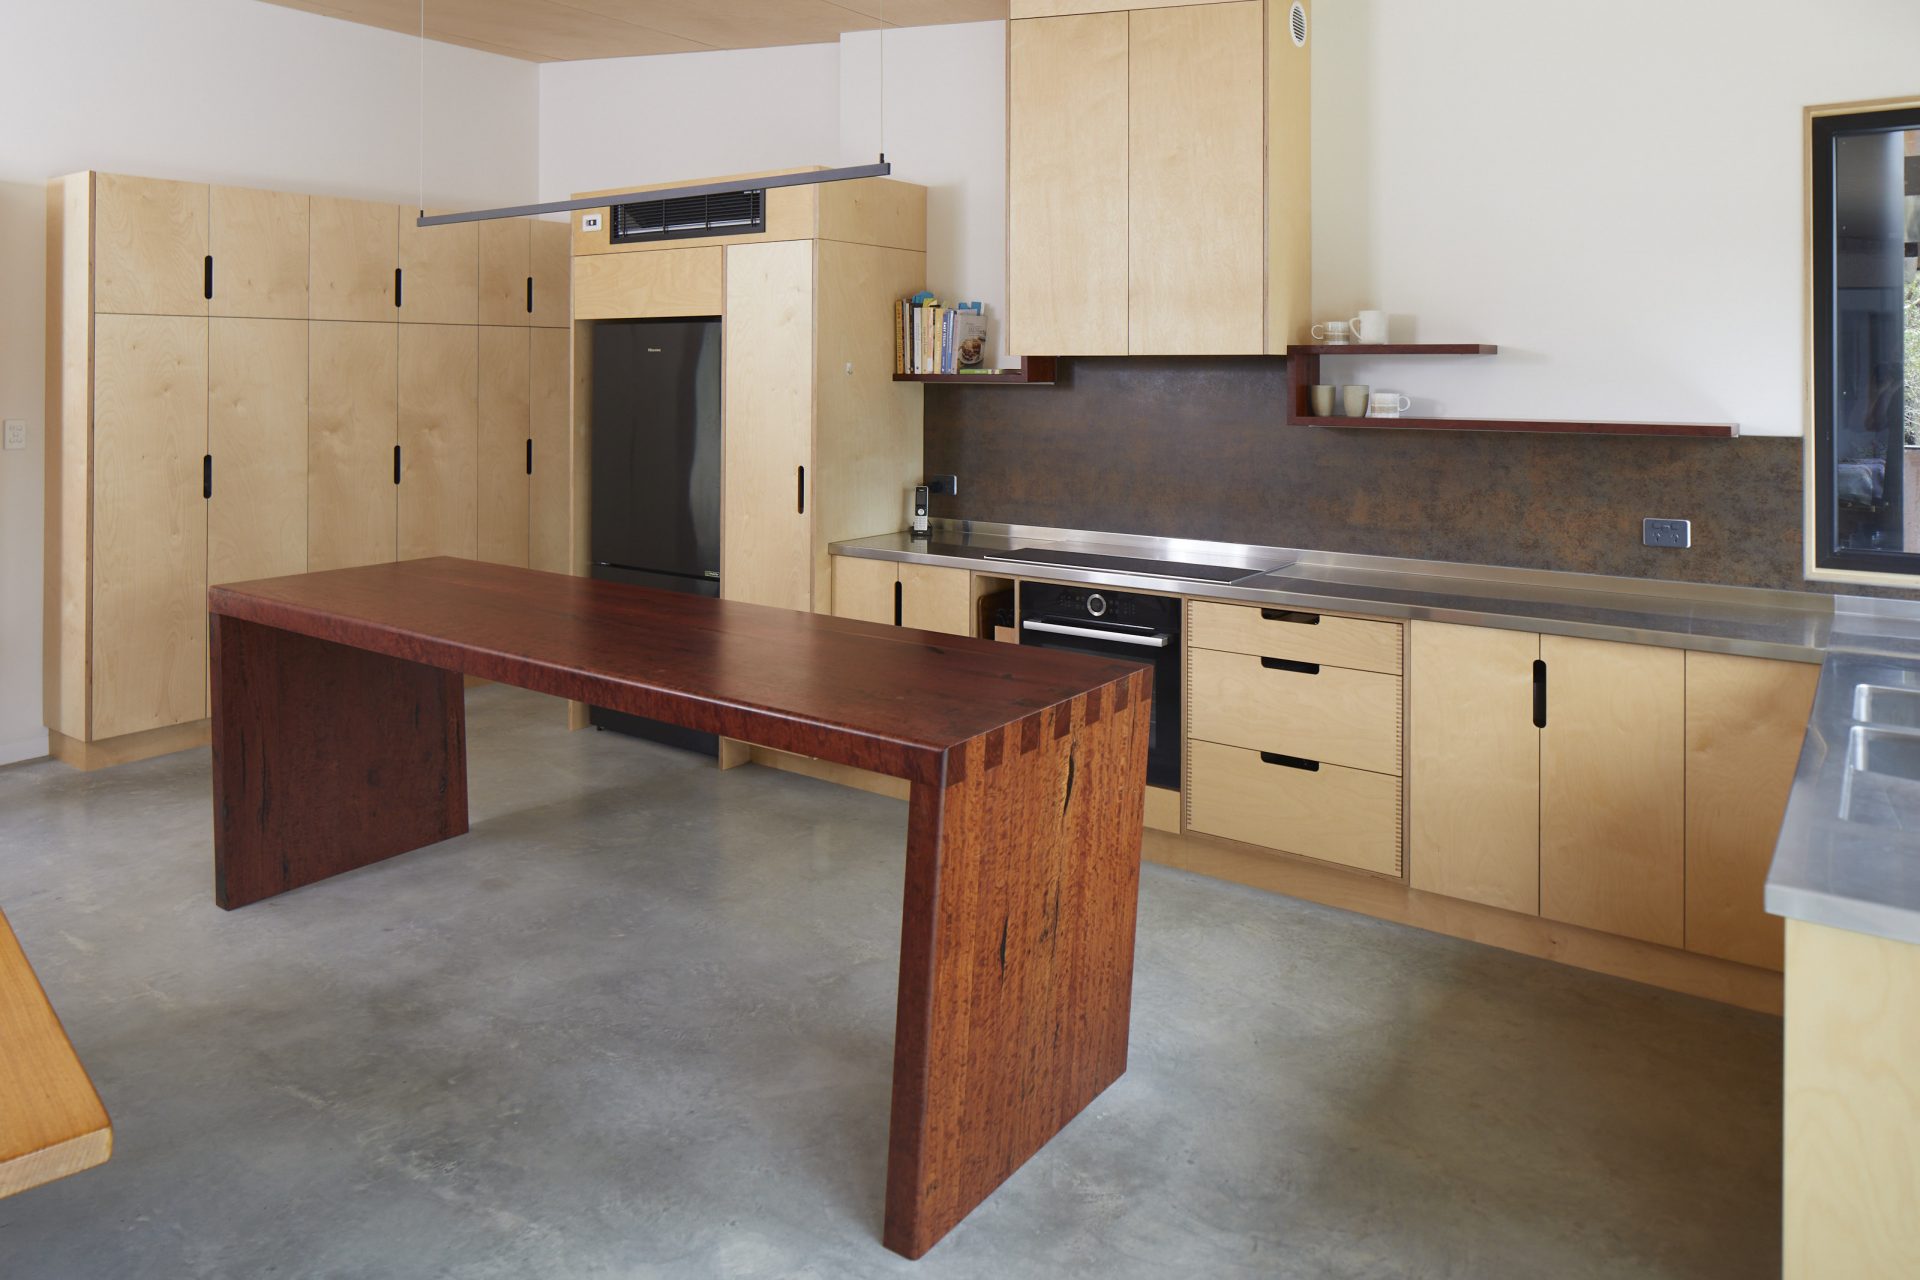 Redgum island bench in plywood kitchen with custom stainless steel bench top.